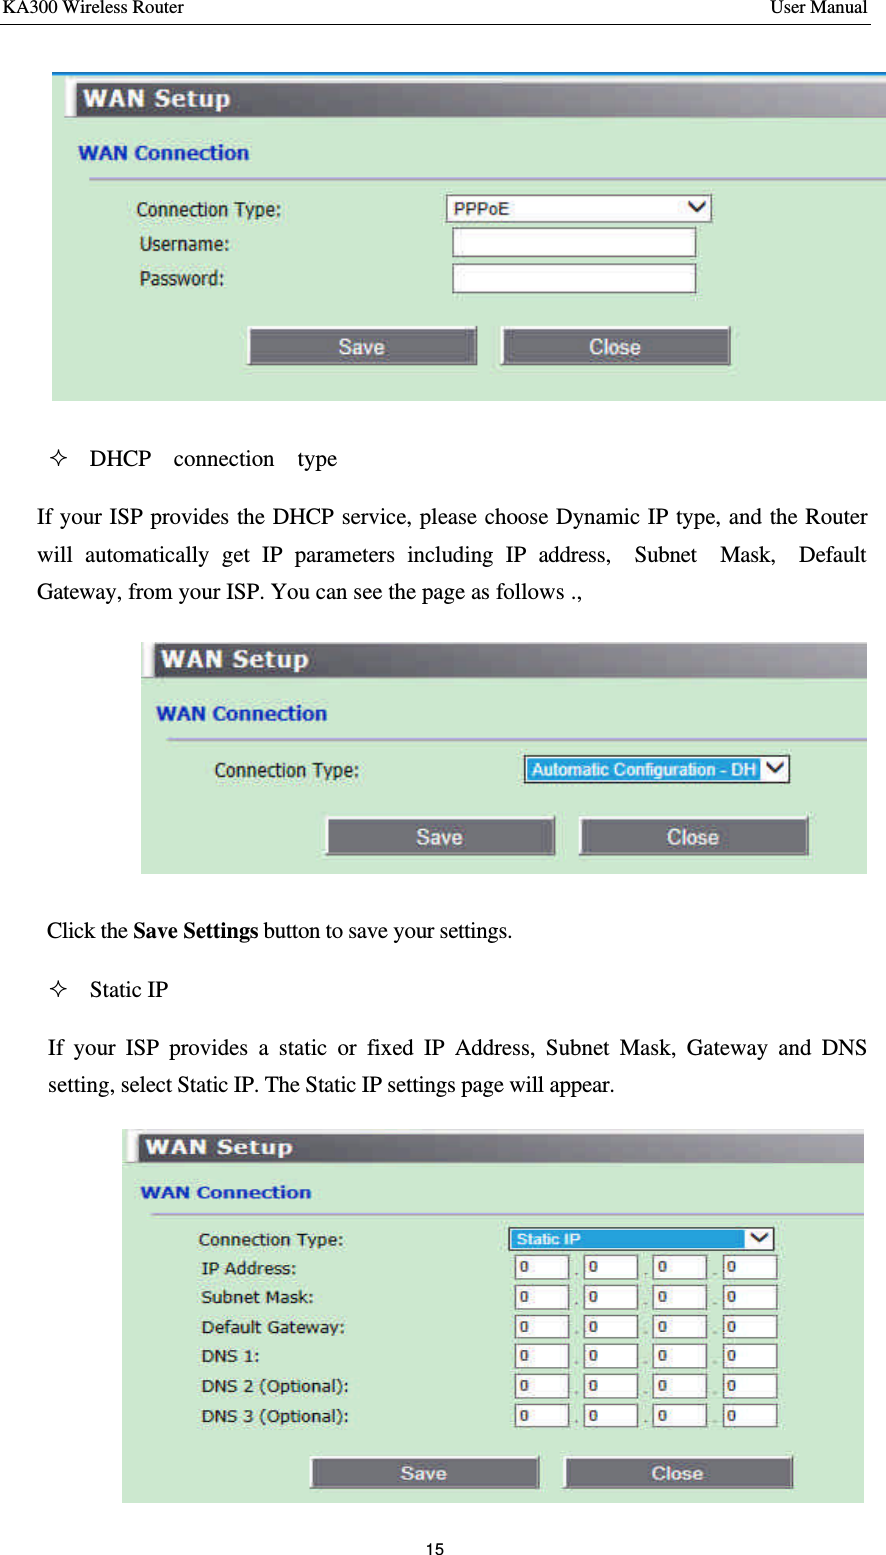 KA300 Wireless Router       User Manual 15   ² DHCP  connection  type If your ISP provides the DHCP service, please choose Dynamic IP type, and the Router will automatically get IP parameters including IP address,  Subnet  Mask,  Default  Gateway, from your ISP. You can see the page as follows .,    Click the Save Settings button to save your settings.   ² Static IP   If your ISP provides a static or fixed IP Address, Subnet Mask, Gateway and DNS setting, select Static IP. The Static IP settings page will appear.  